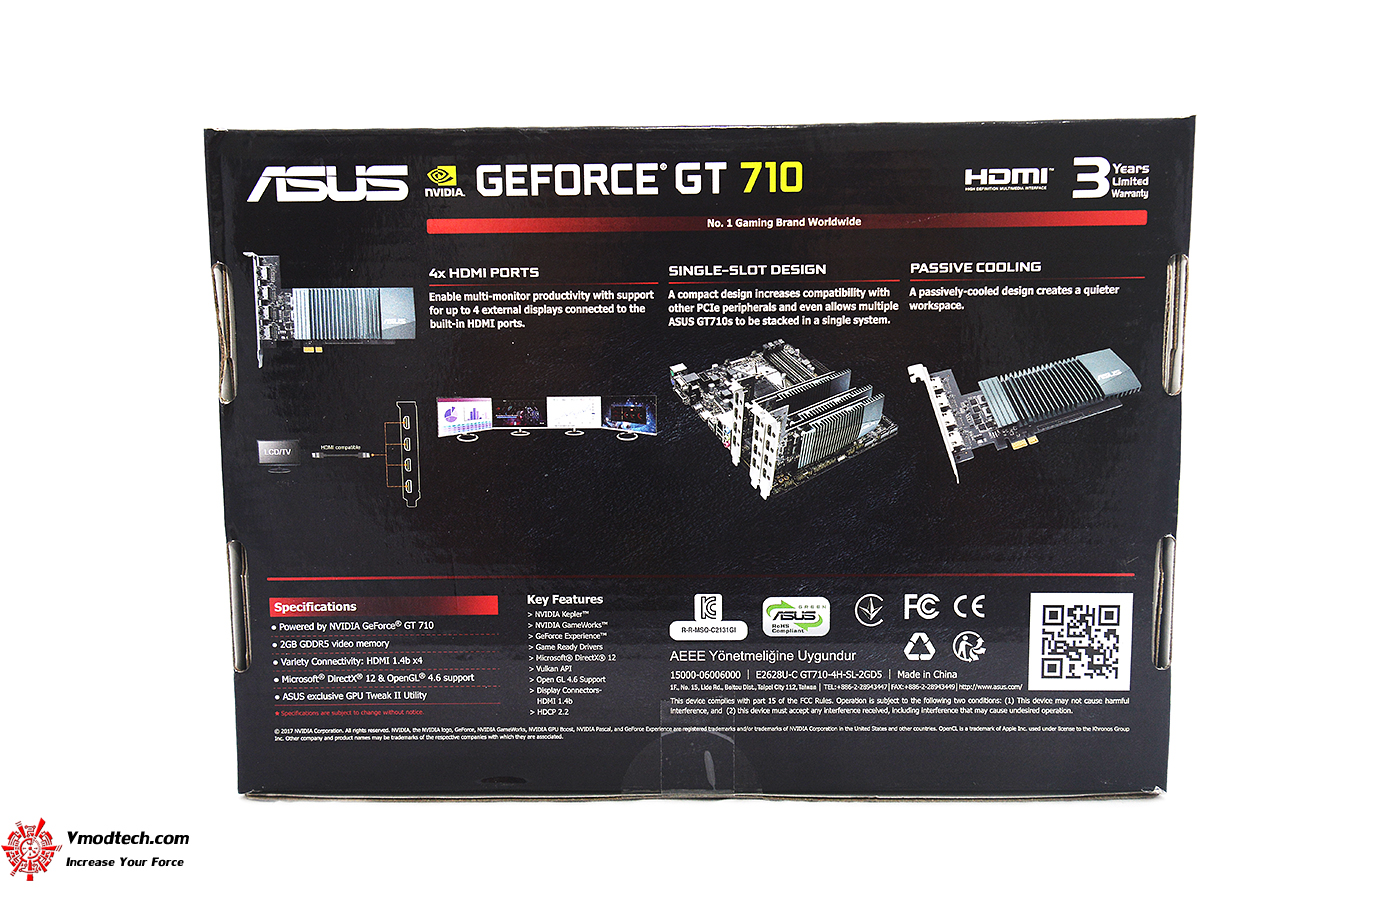 dsc 5613 ASUS GeForce GT 710 with 4 HDMI ports Review